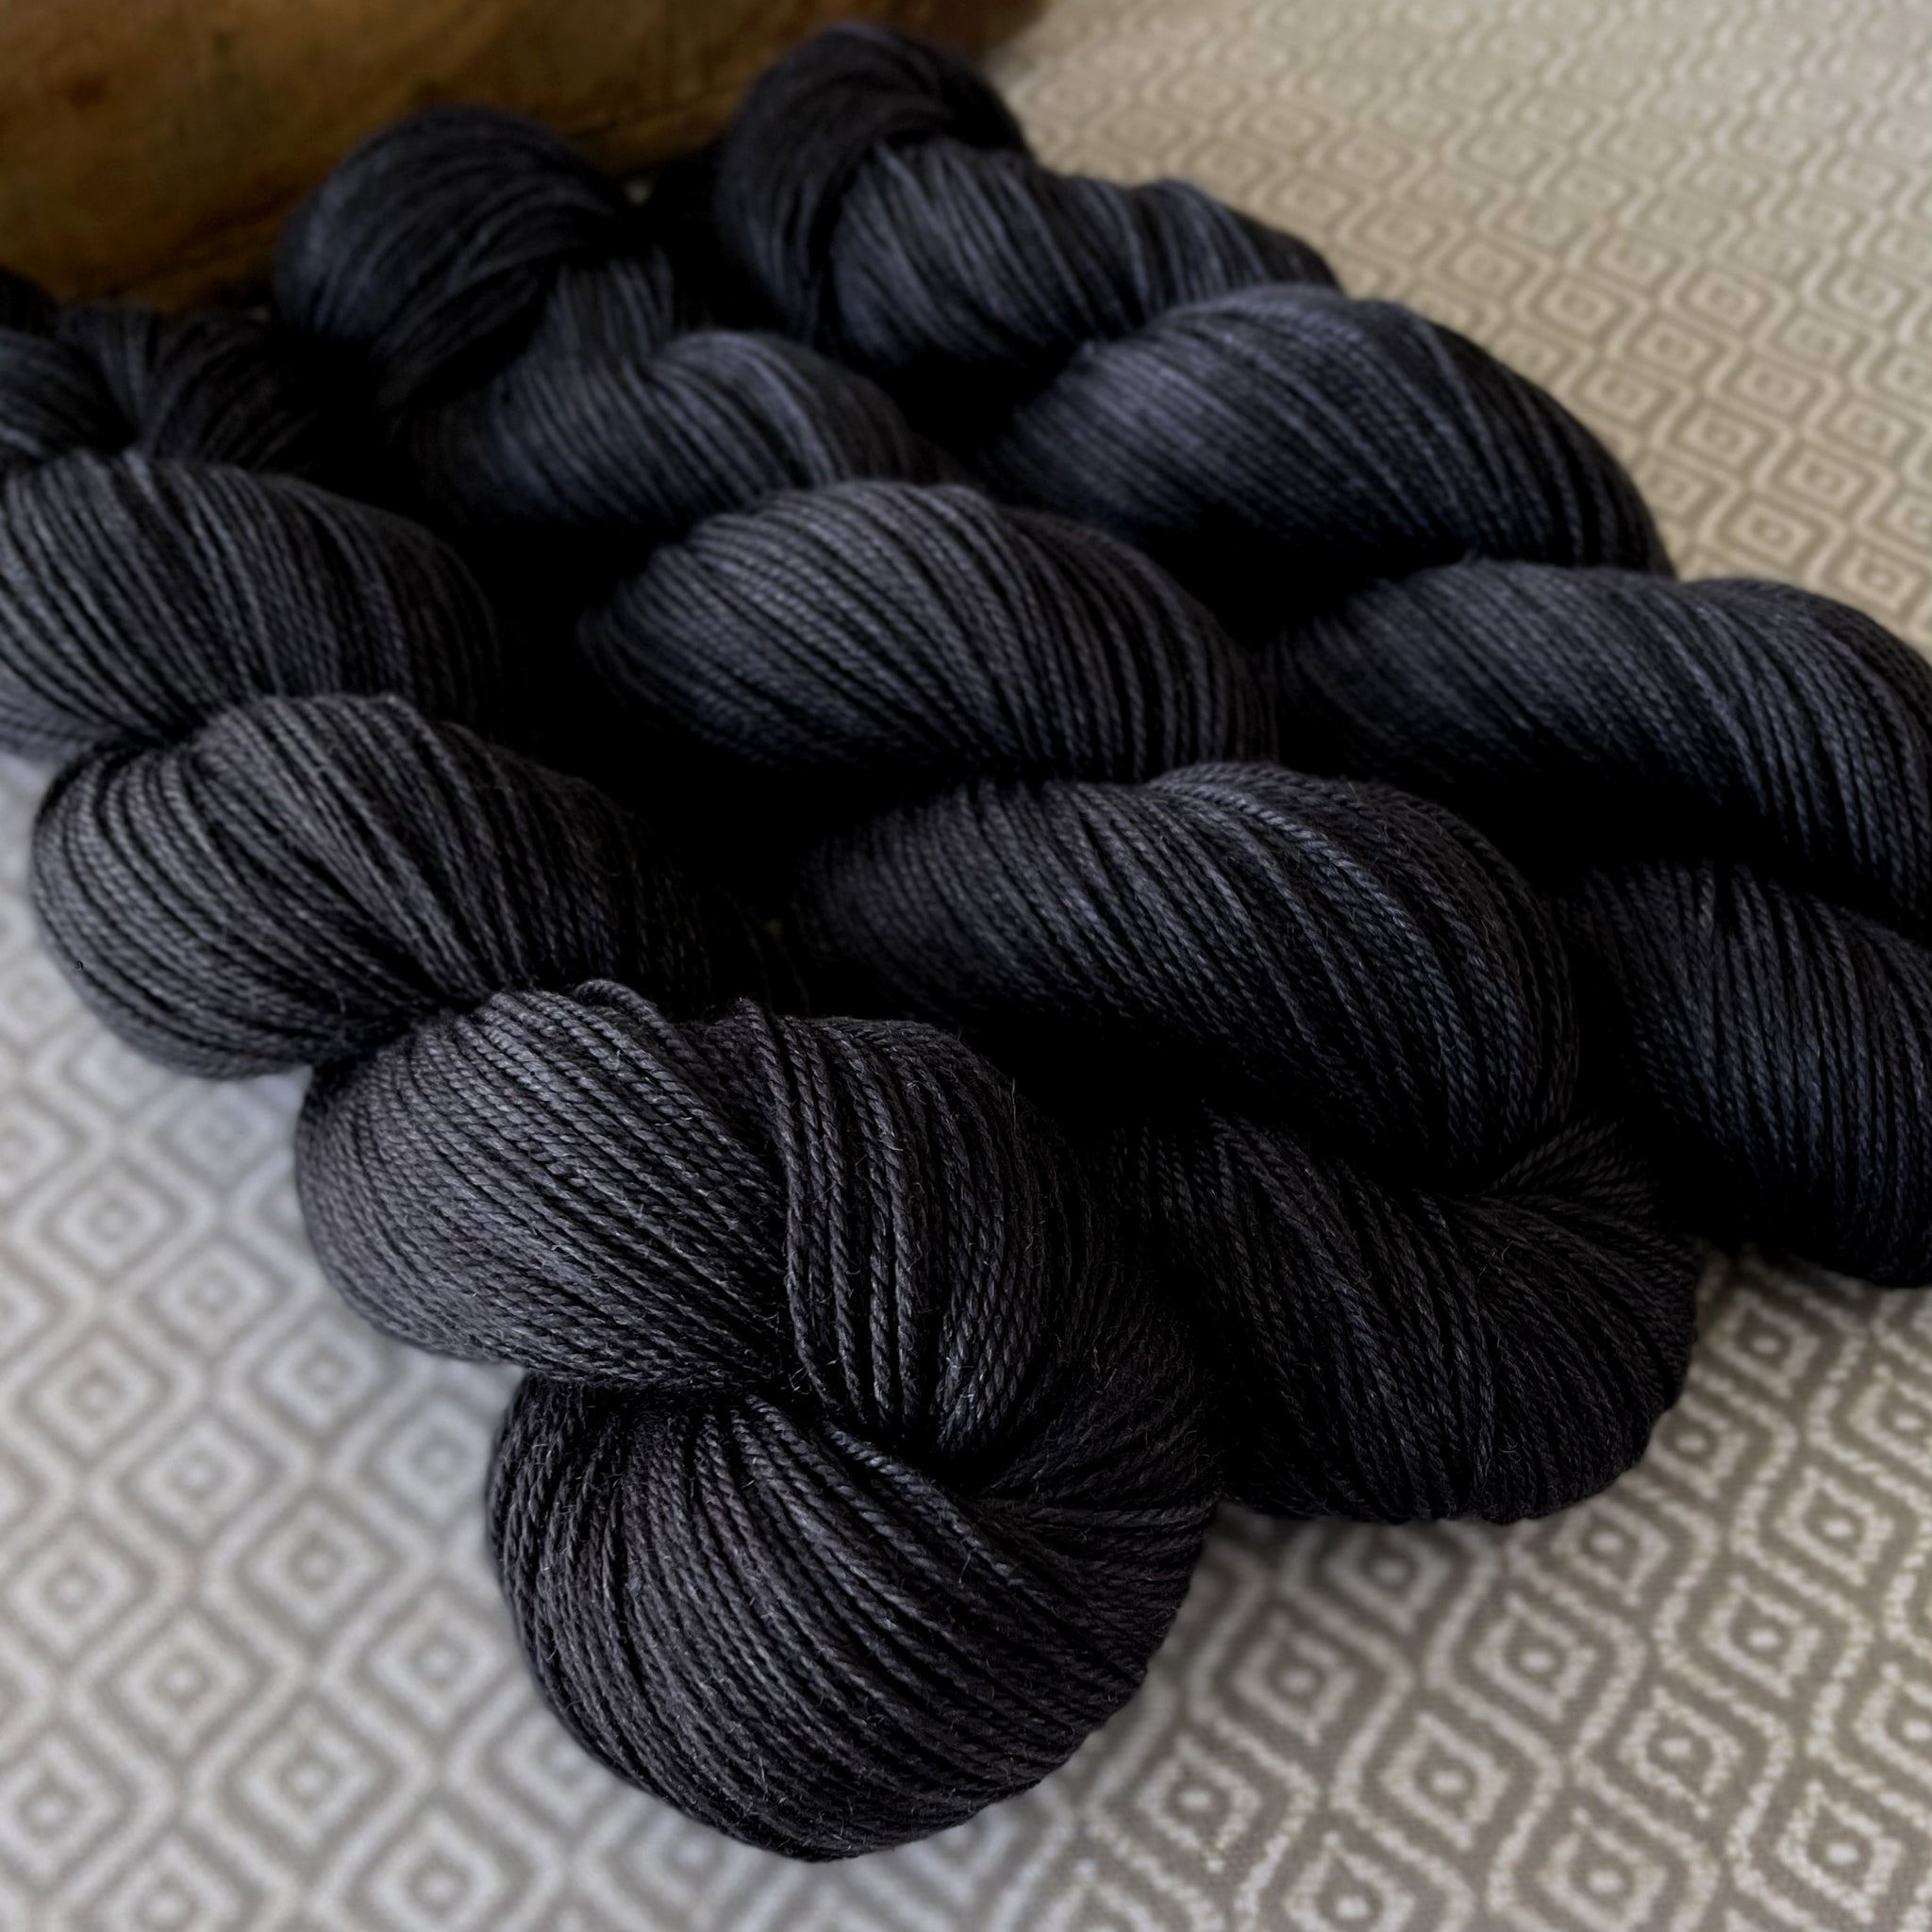 Black Owned Yarn Businesses You Should Know - SHOPPE BLACK